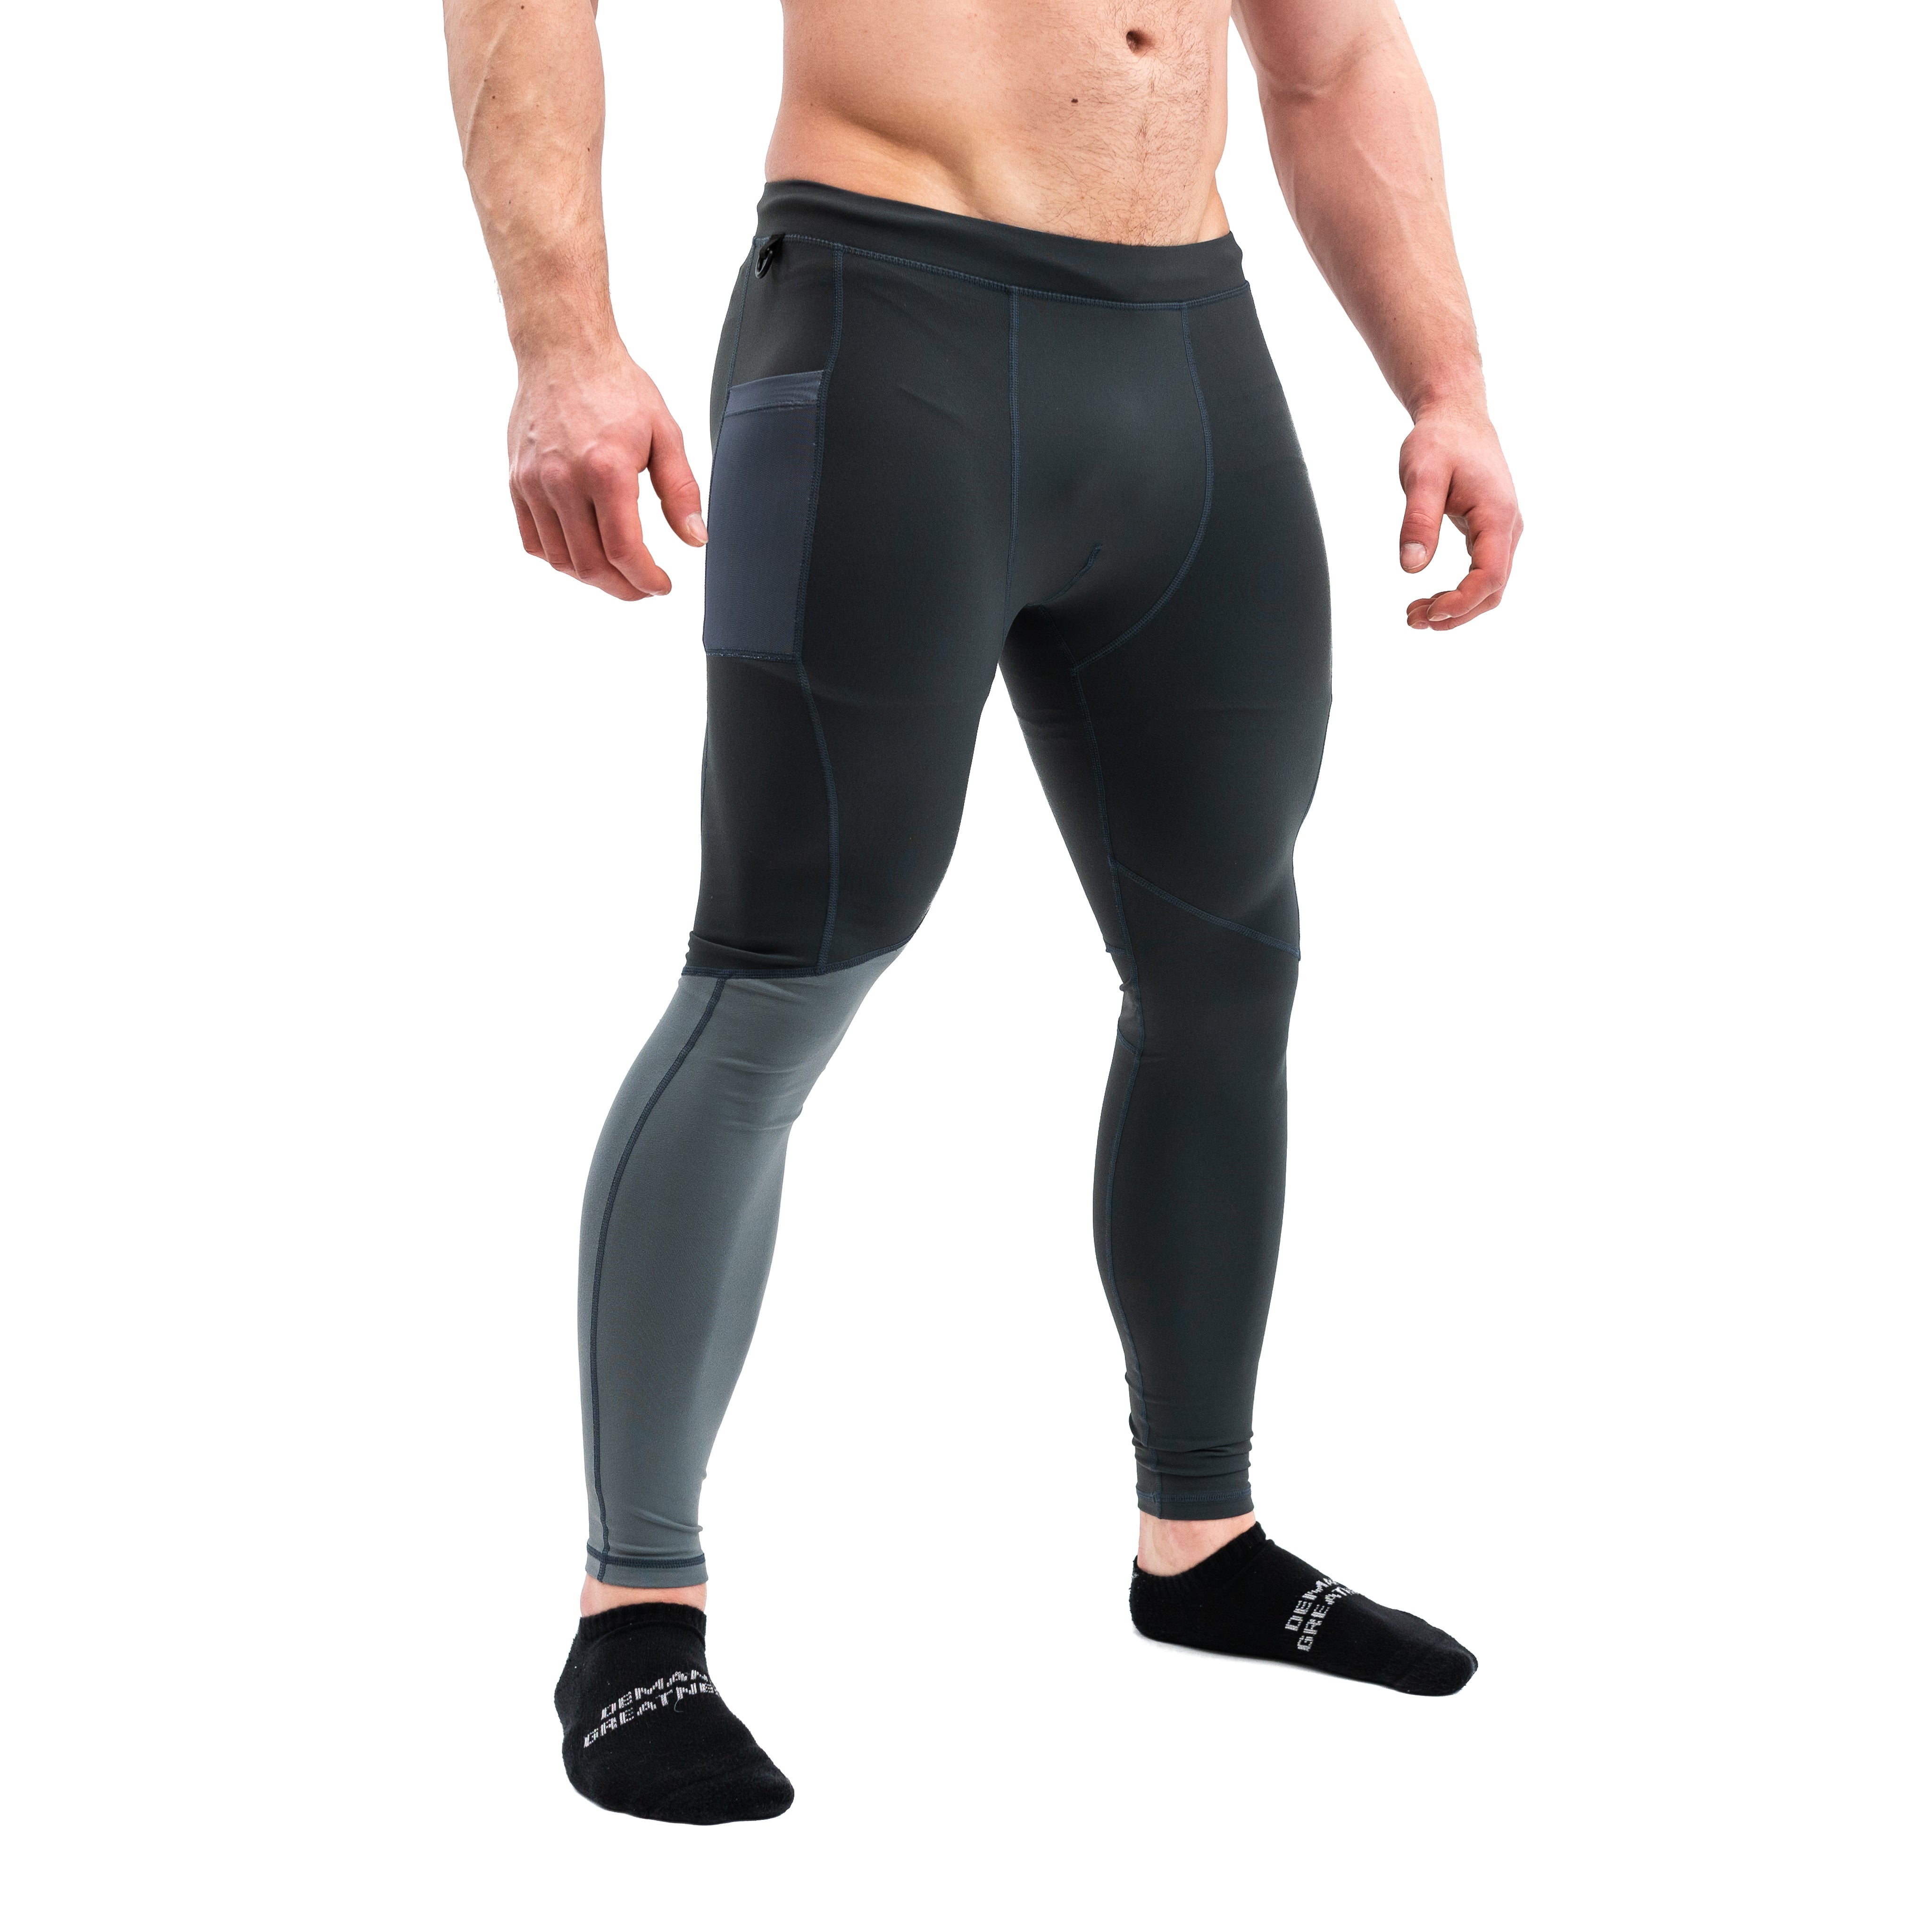 Chromium compression pants for the powerlifter and weightlifter. Our same compression pants in a new Chromium colourway to go with your new chromium bar grip shirts. Perfect powerlifting apparel providing maximum comfort. A7 has IPF approved powerlifting apparel and is perfect for Powerlifting, weightlifting, strongman and all your strength sport’s needs. Shipping to Europe (France, Germany, Spain, Italy and the Netherlands) and the UK, Norway, Switzerland, and Iceland.